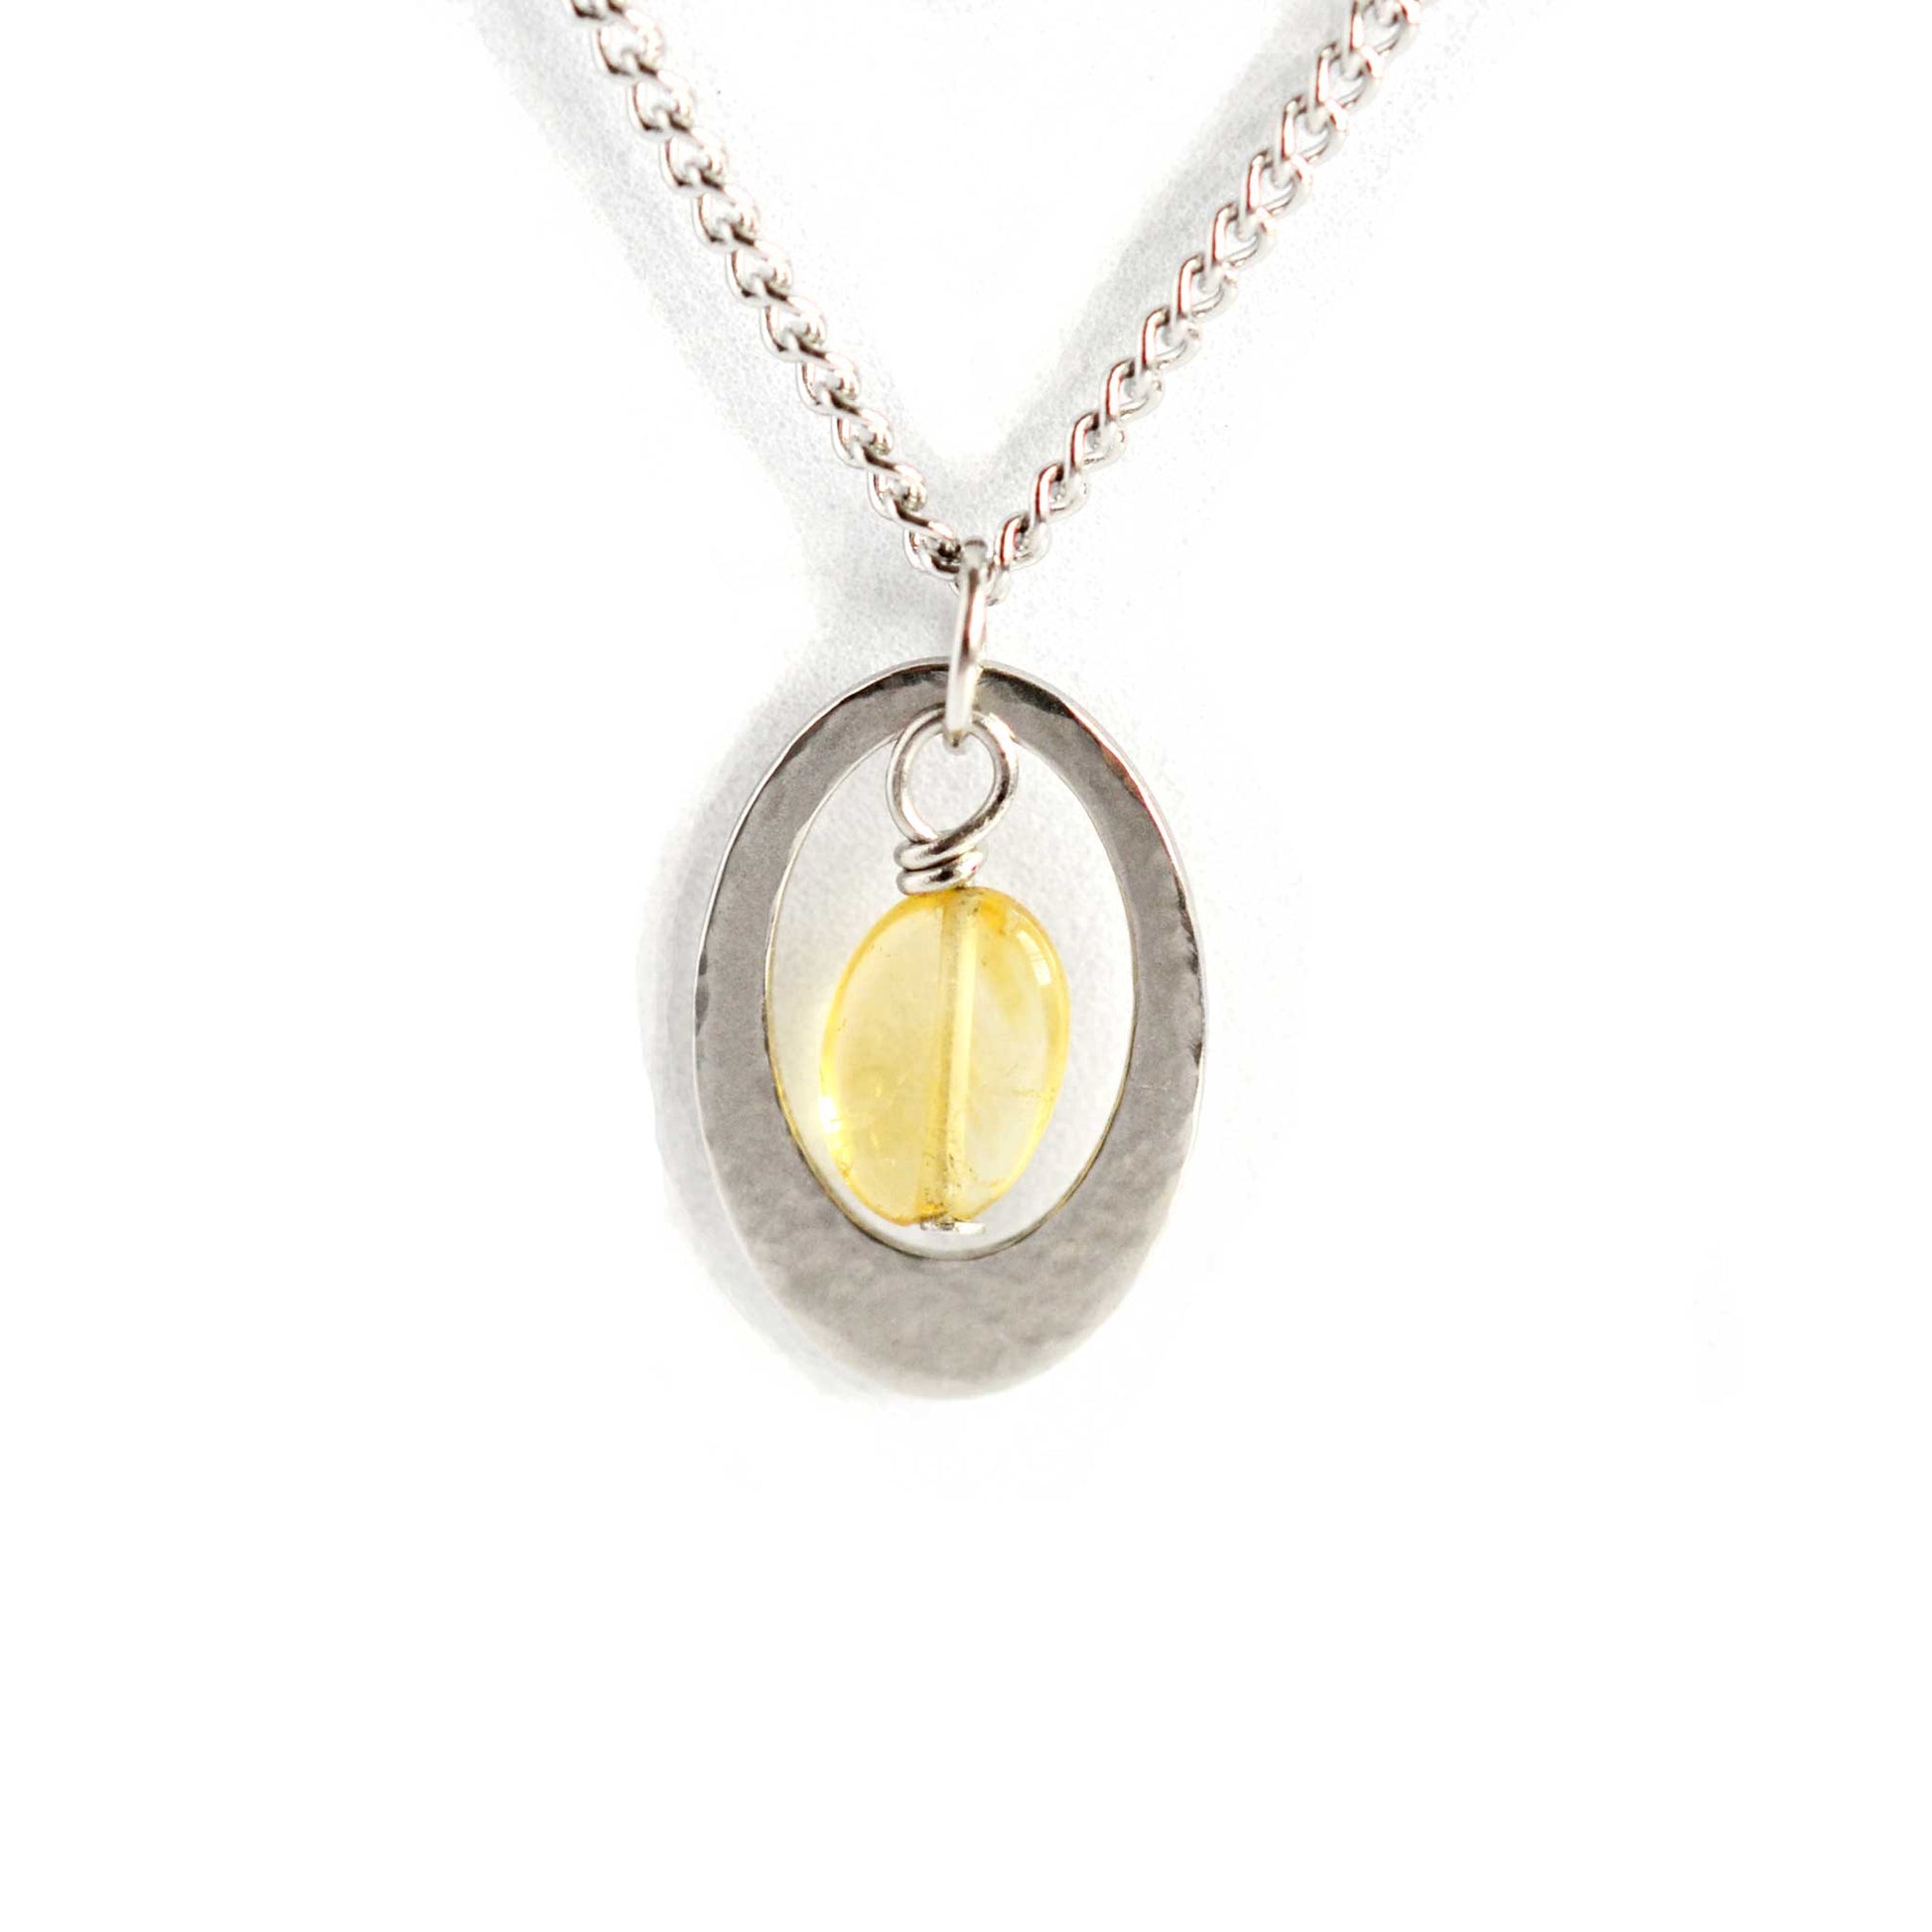 Oval Citrine pendant necklace on stainless steel curb chain.